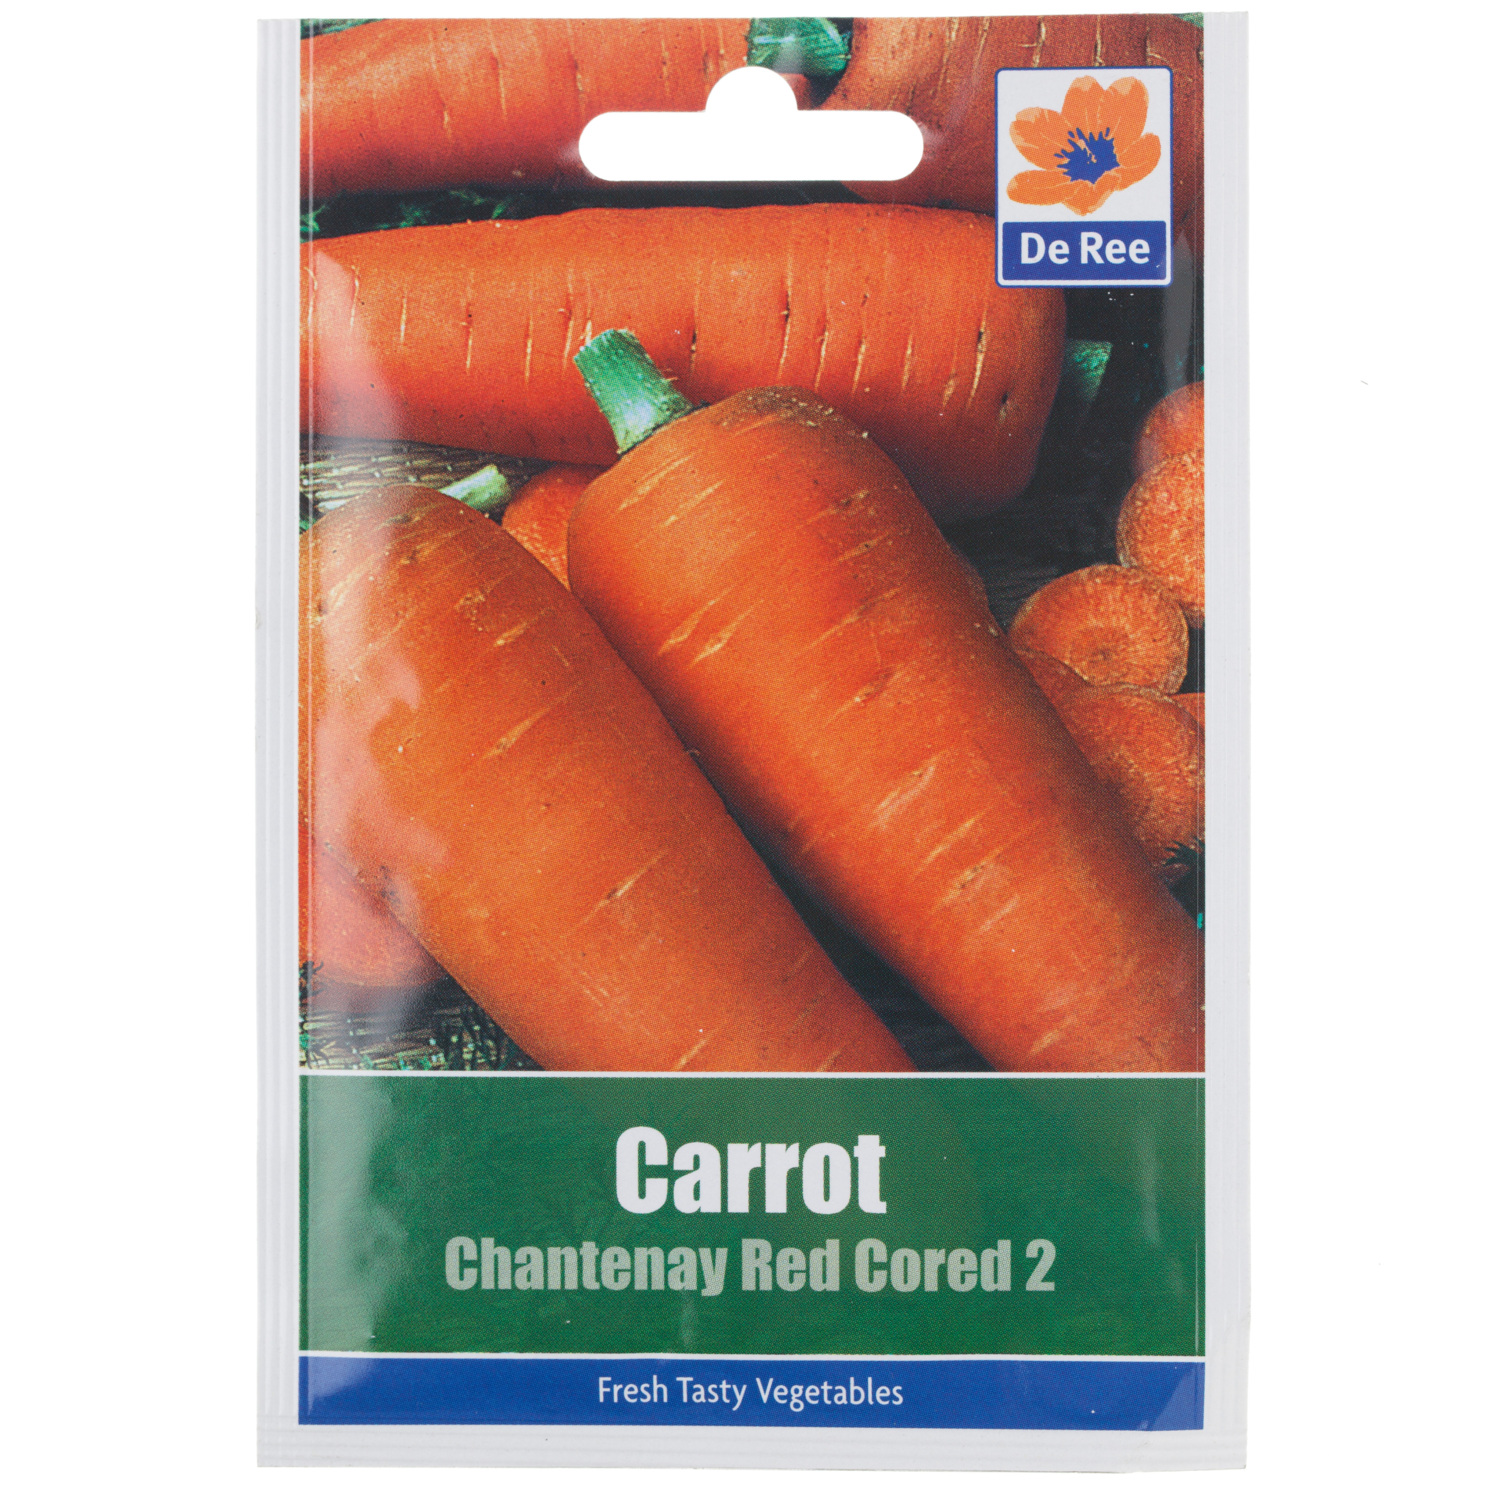 Carrot Chantenay Red Cored 2 Seed Packet Image